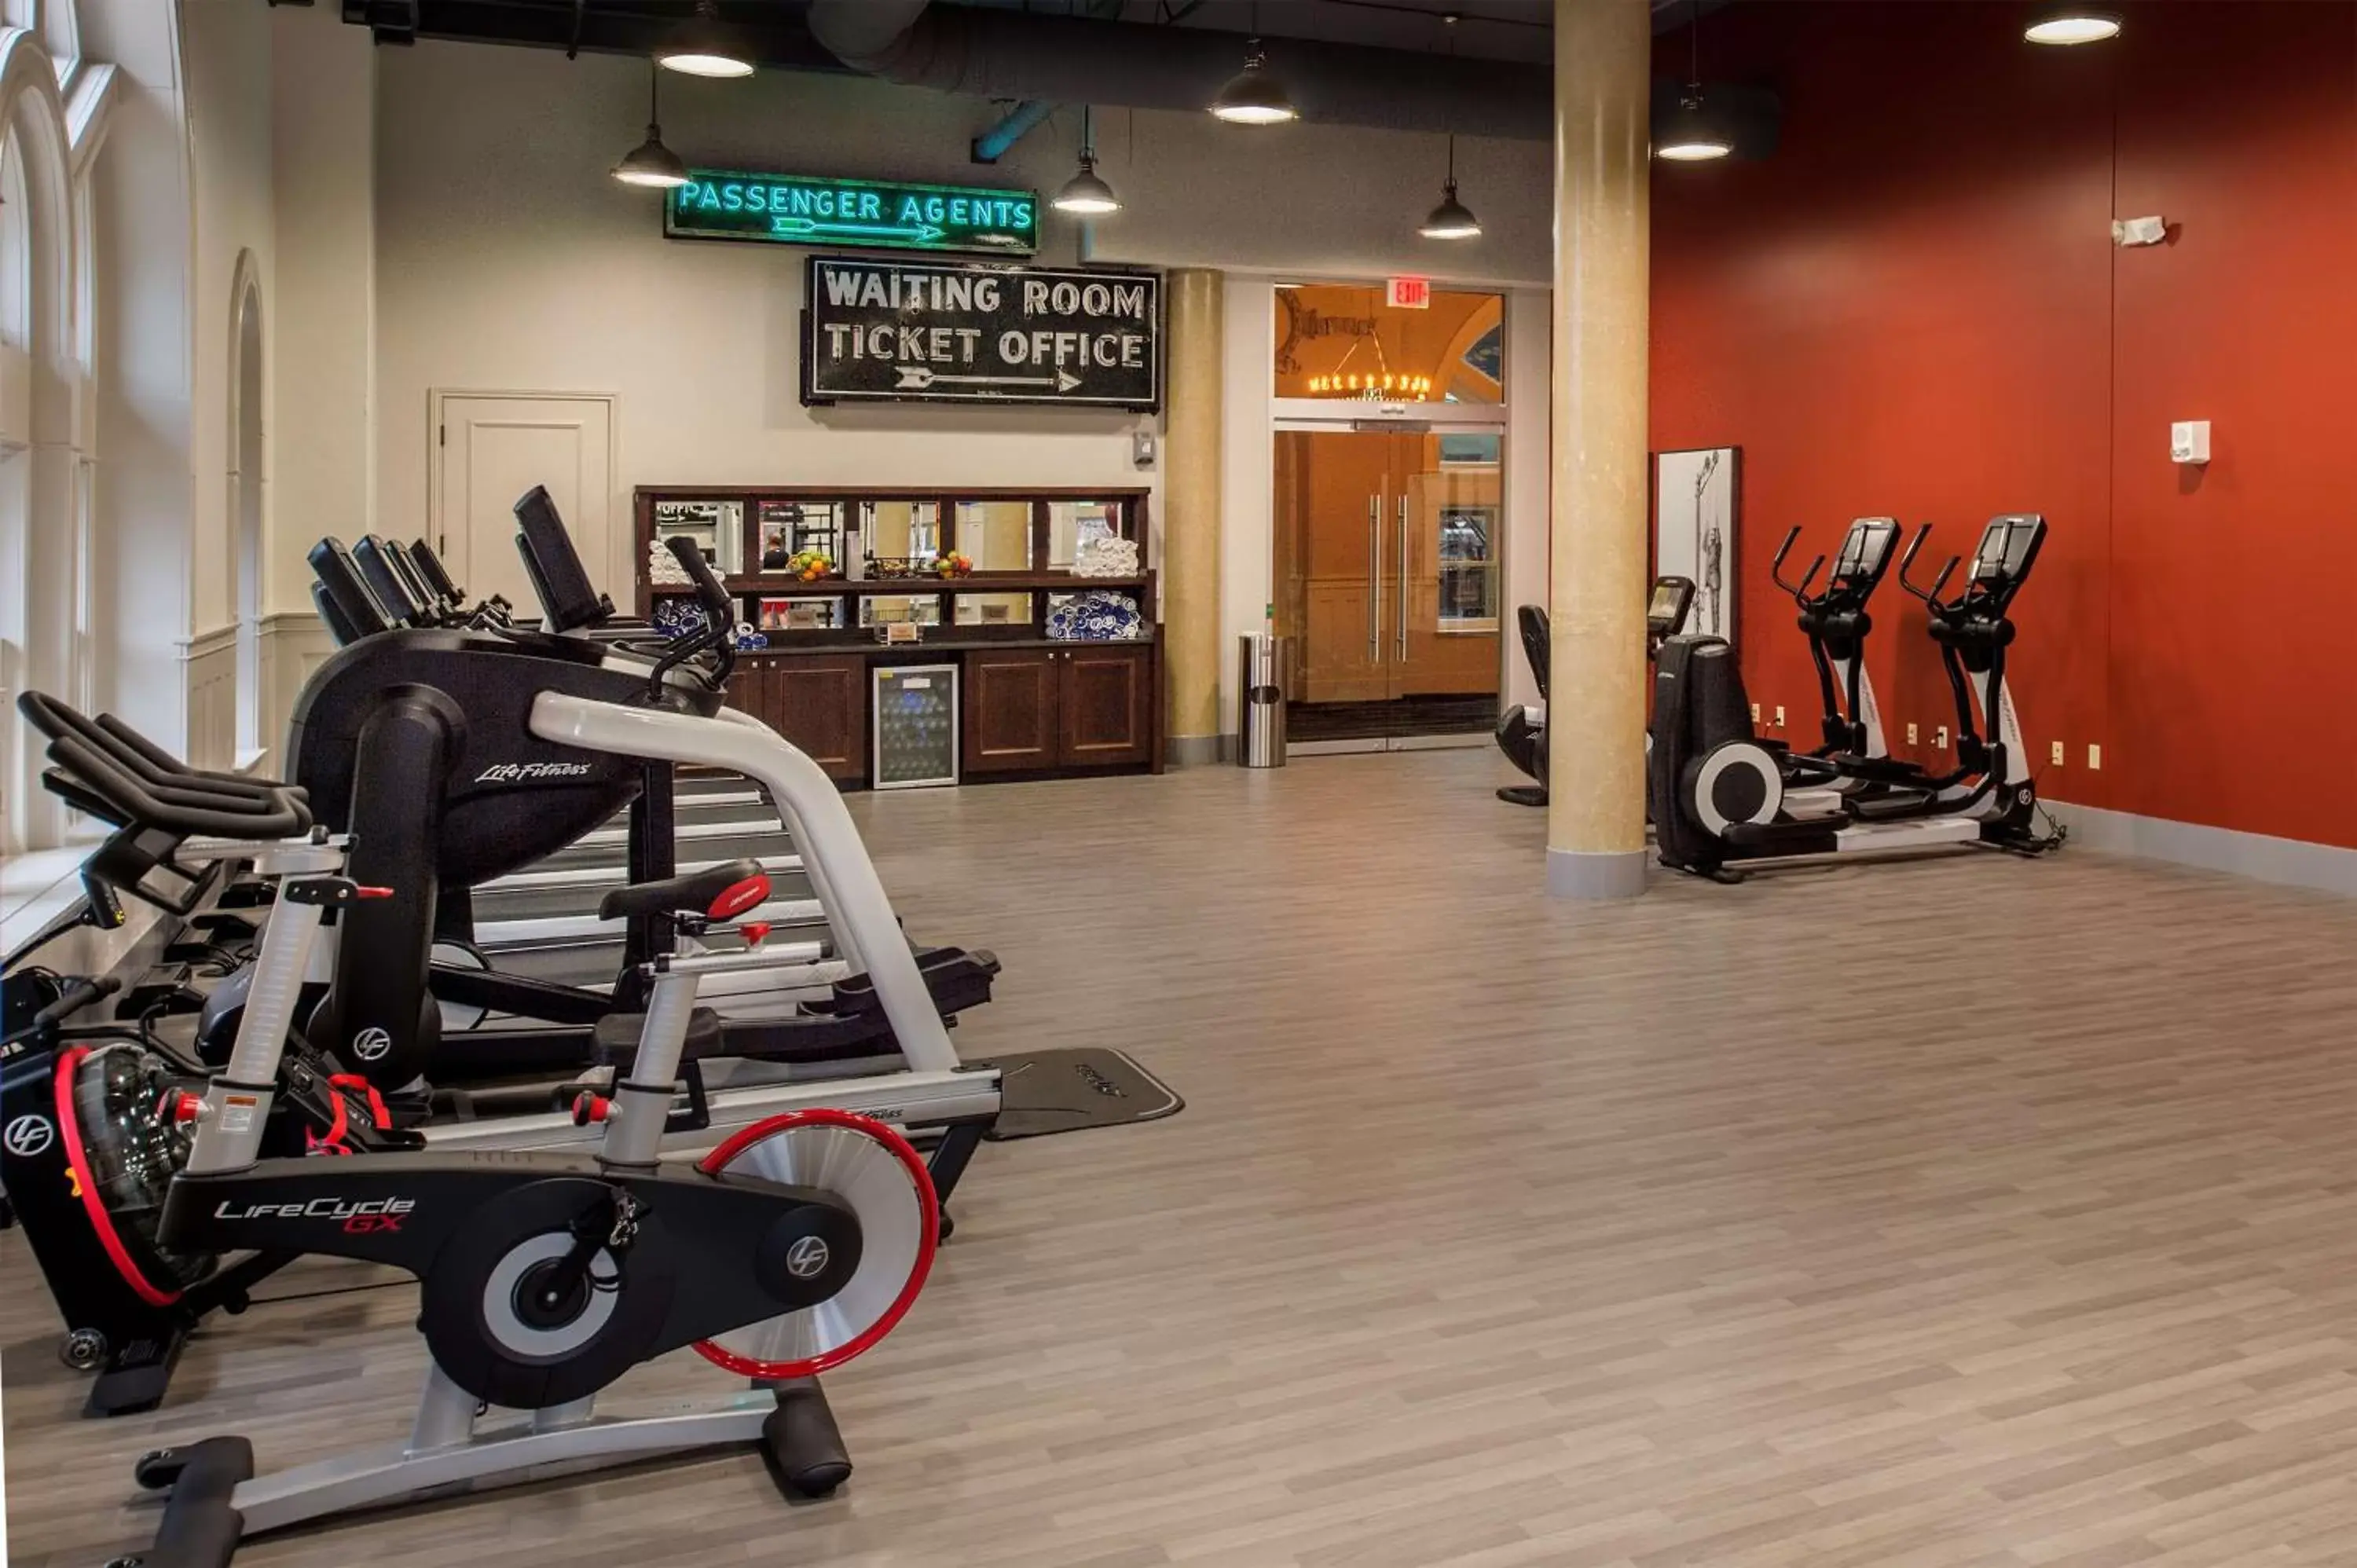 Fitness centre/facilities, Fitness Center/Facilities in St. Louis Union Station Hotel, Curio Collection by Hilton